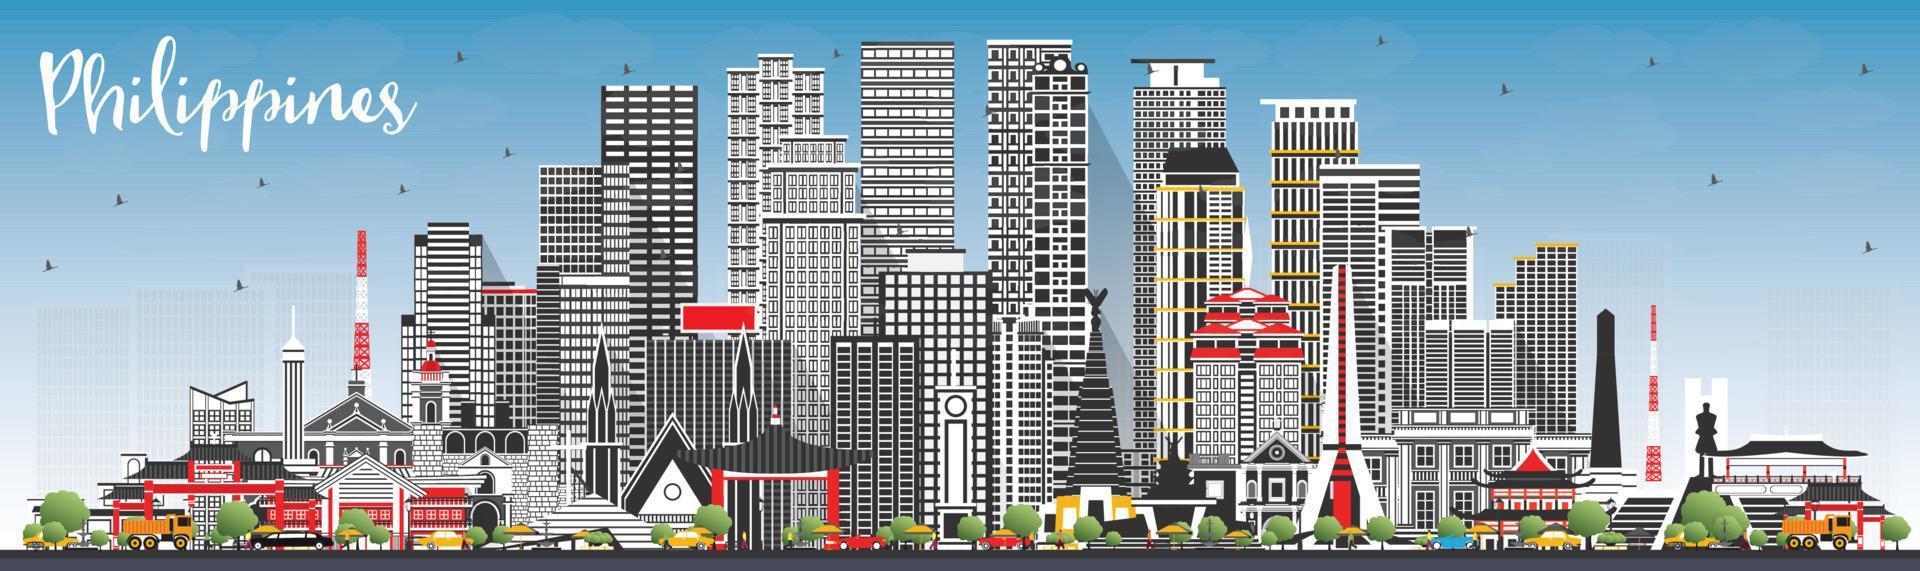 Philippines City Skyline with Gray Buildings and Blue Sky. vector